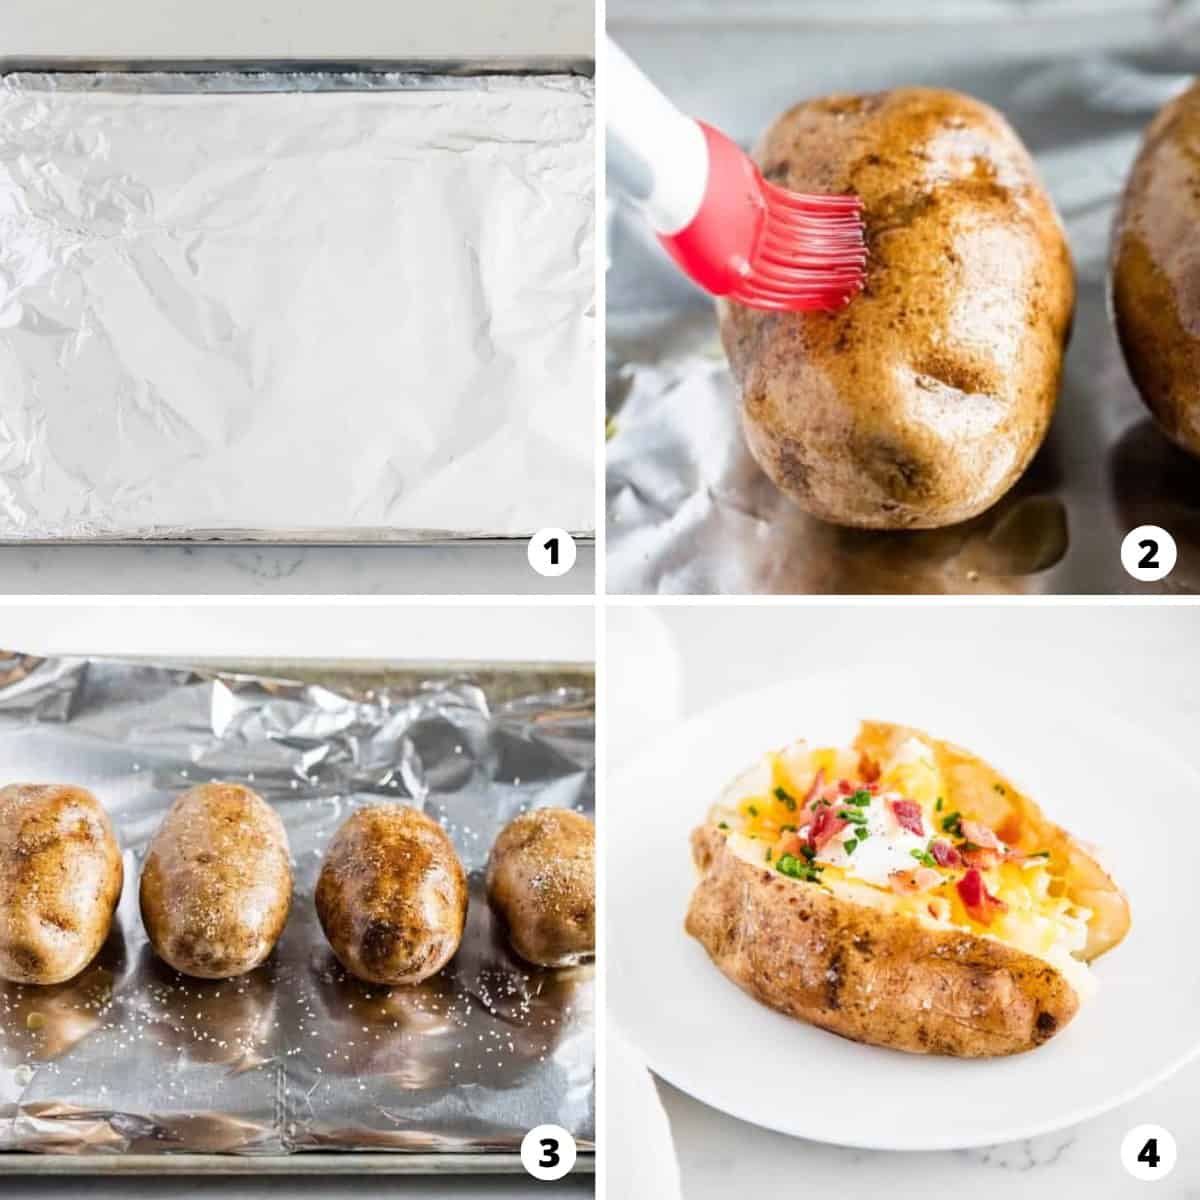 A photo collage showing step by step how to make a loaded baked potato.